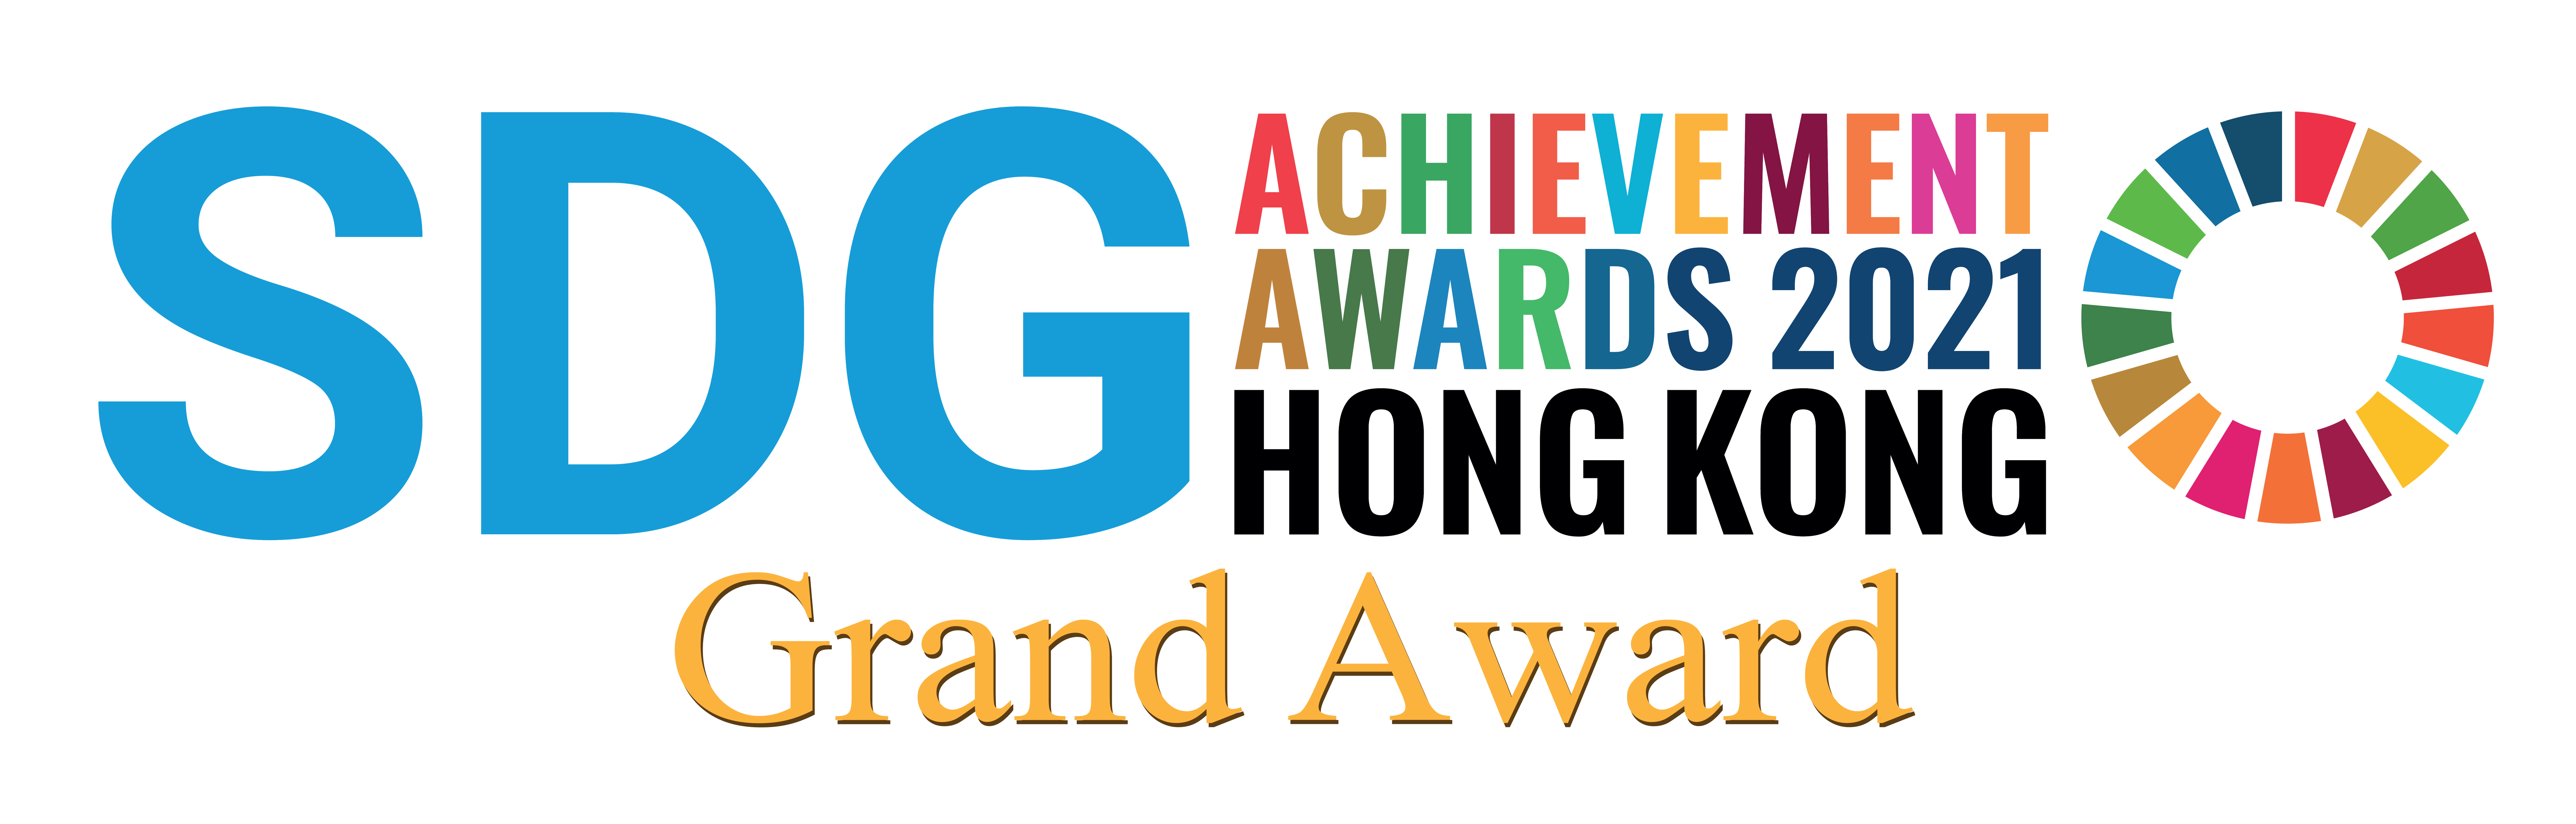 HML’s “Think Before Plastic” campaign has won the Grand Award, “Stakeholder Engagement” Award and “Best Approach” Award at the SDG Achievements Awards Hong Kong 2021, organised by the Green Council.